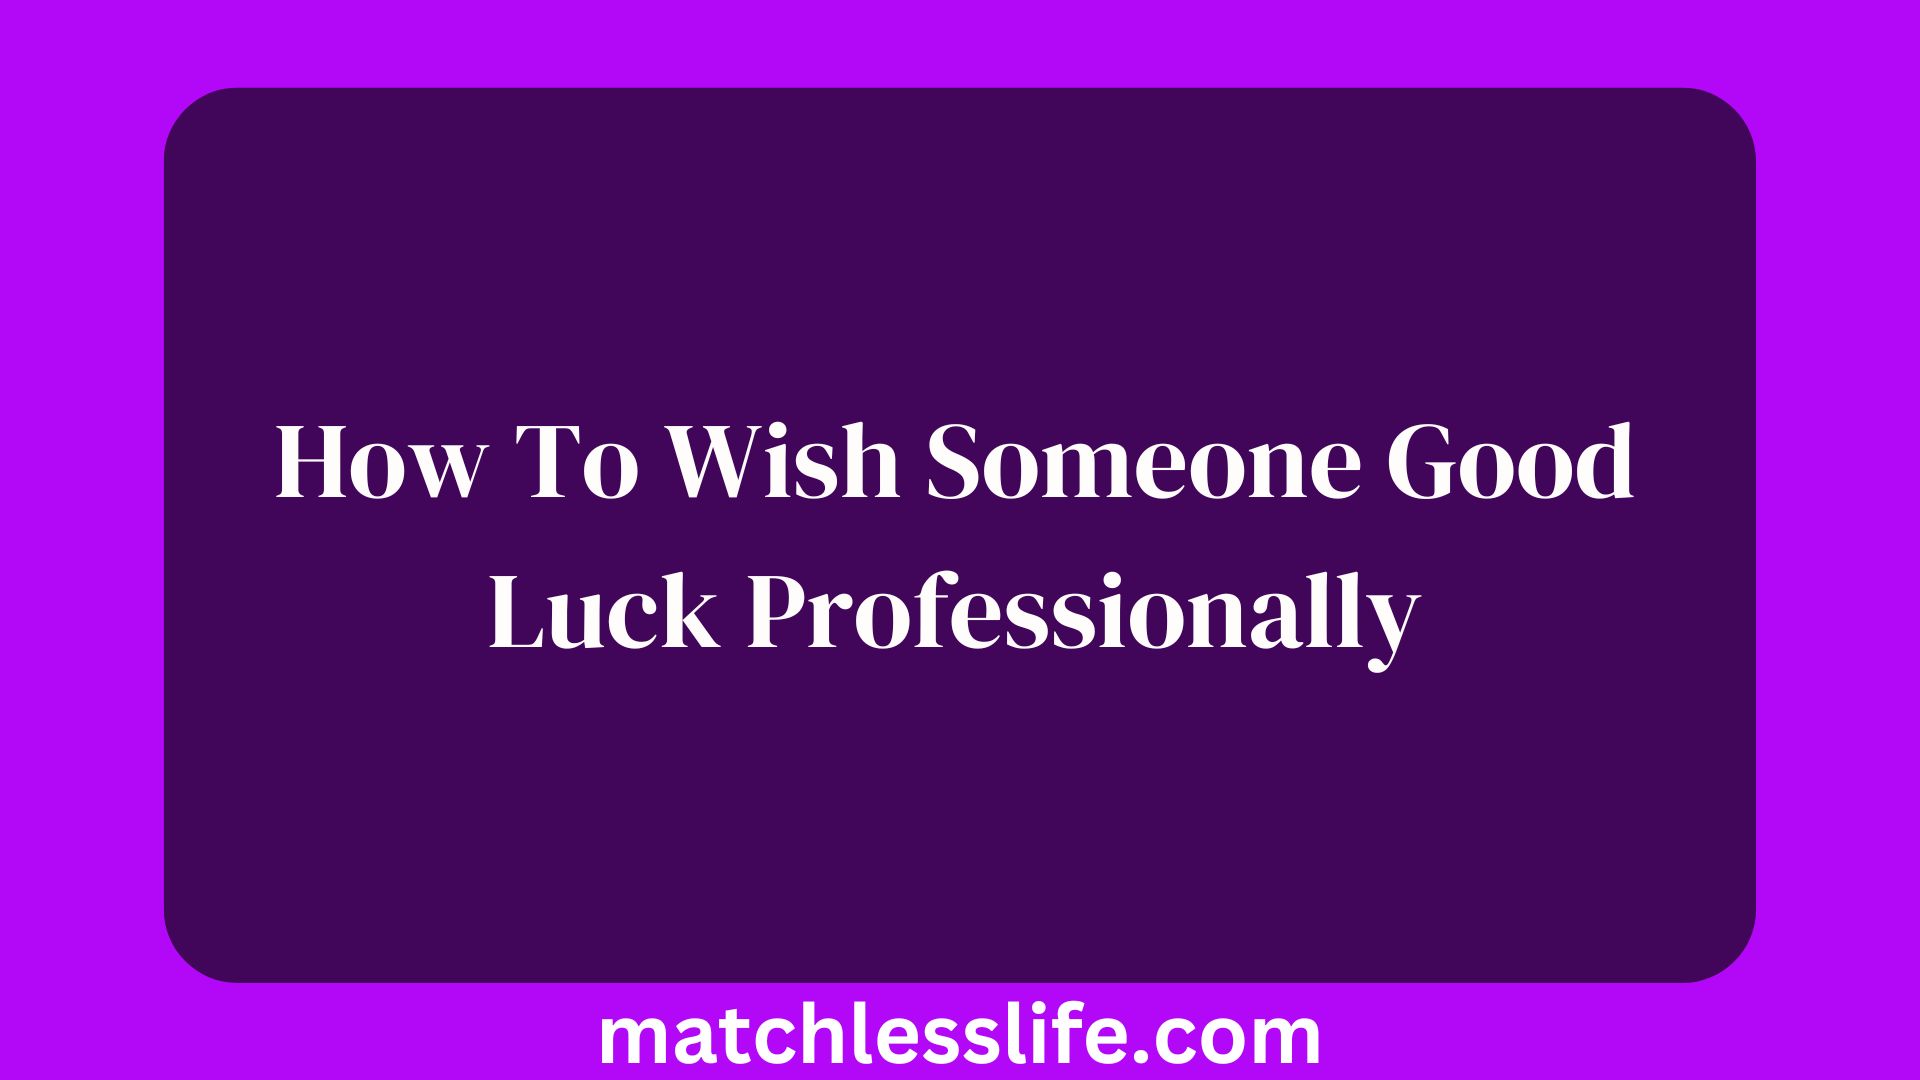 How To Wish Someone Good Luck Professionally